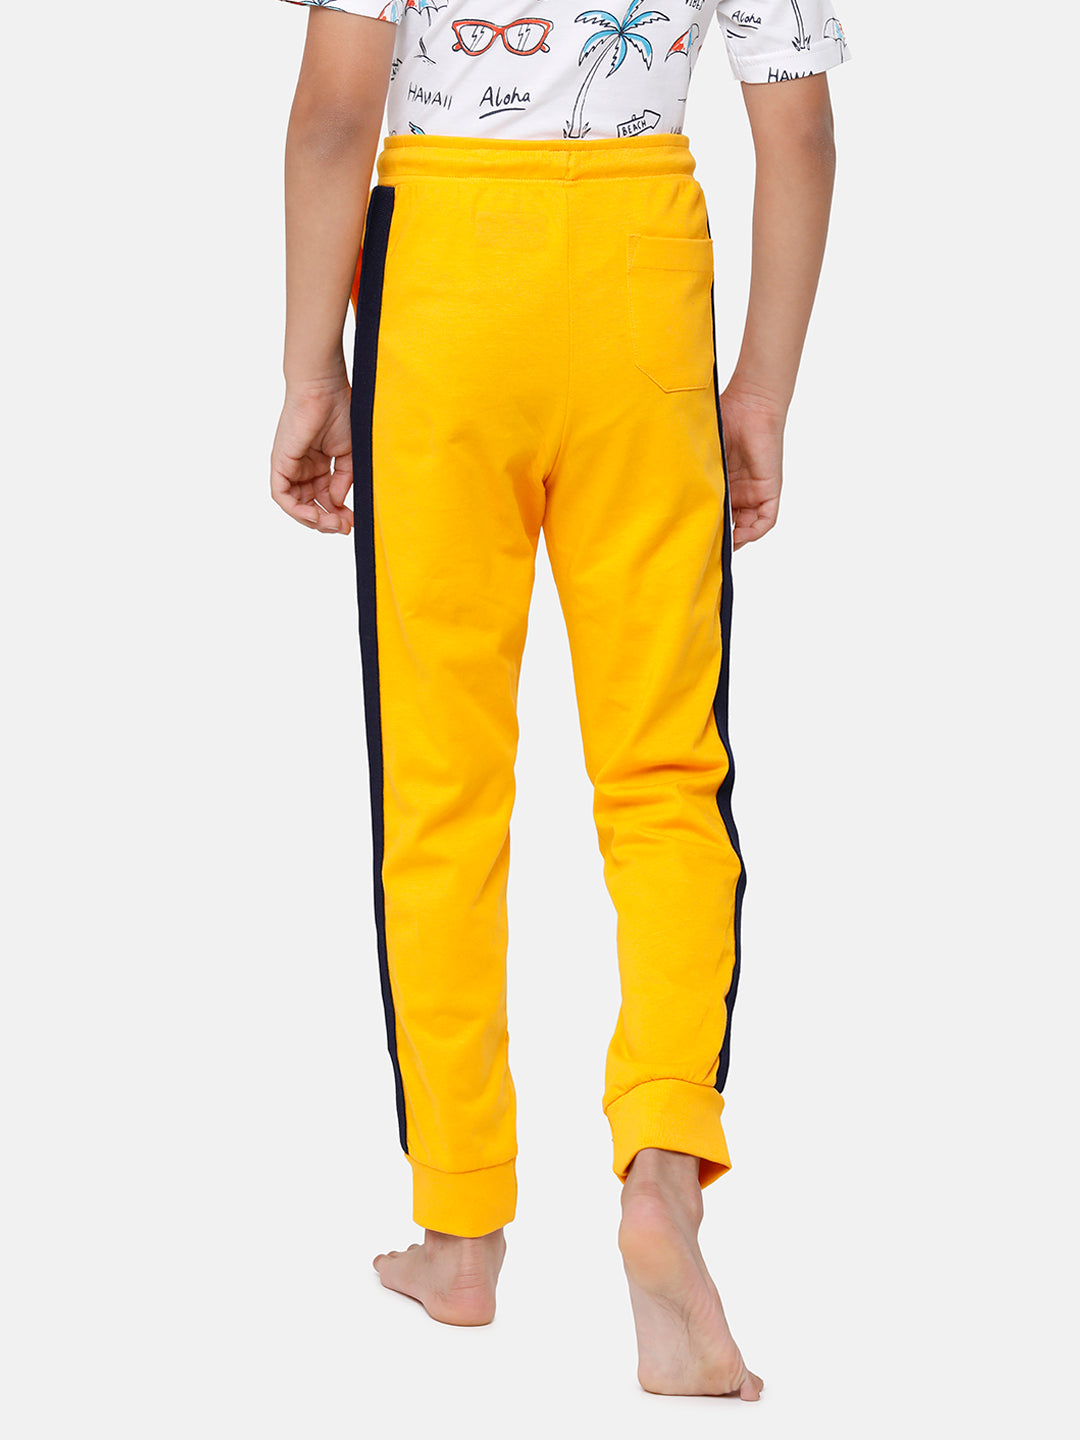 Buy Men's Yellow Relaxed Fit Track Pants Online at Bewakoof